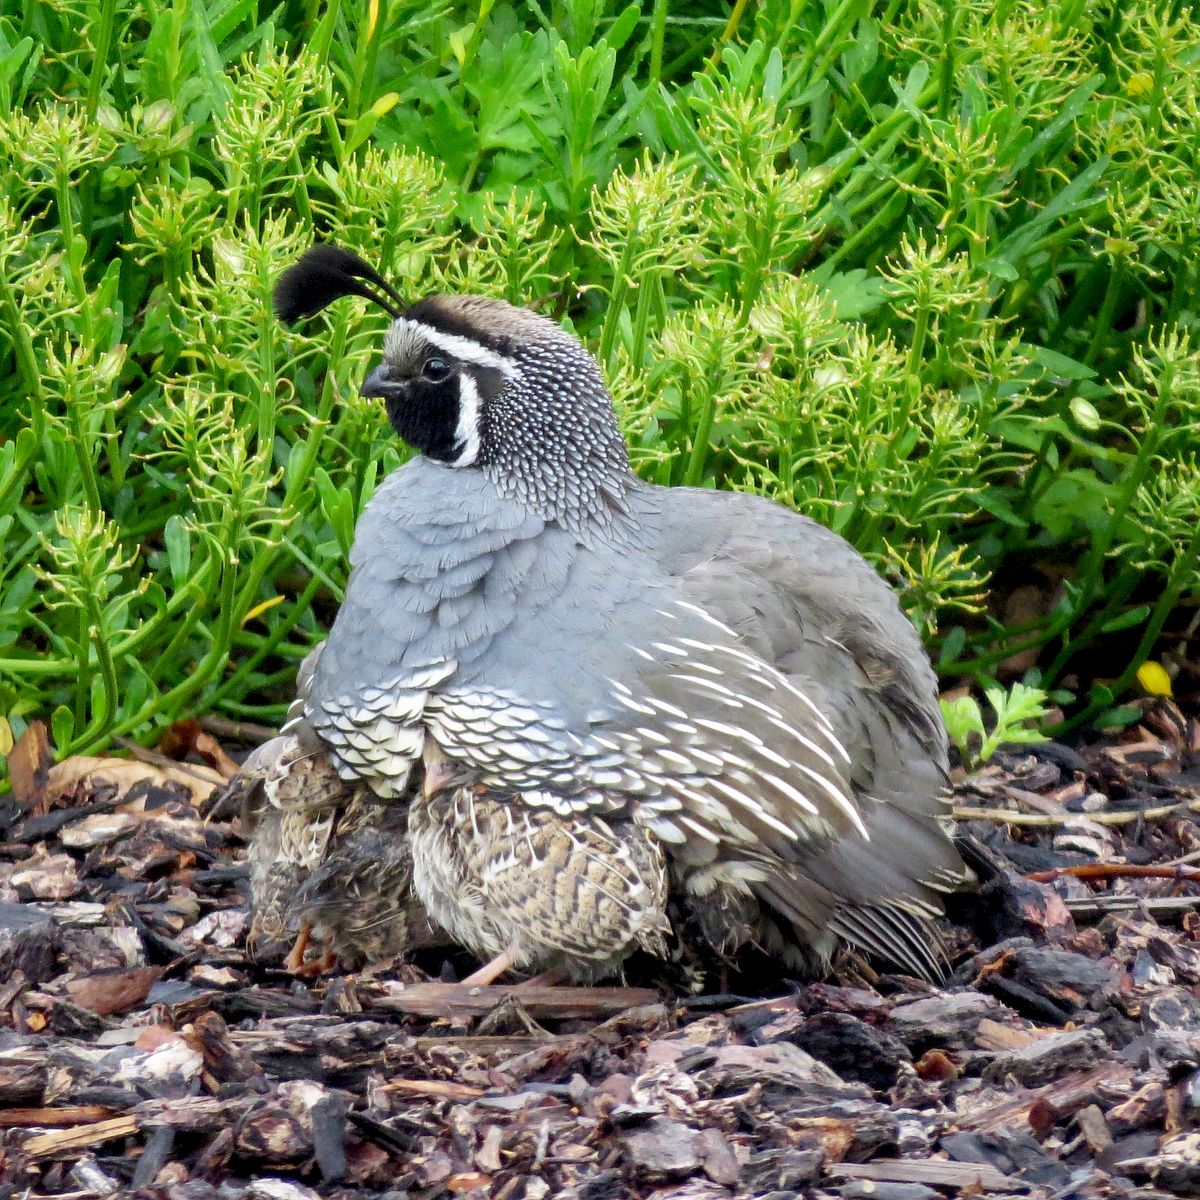 This male California quail protects his brood beneath his feathers during naptime.  (Susan Mulvihill/For The Spokesman-Review)